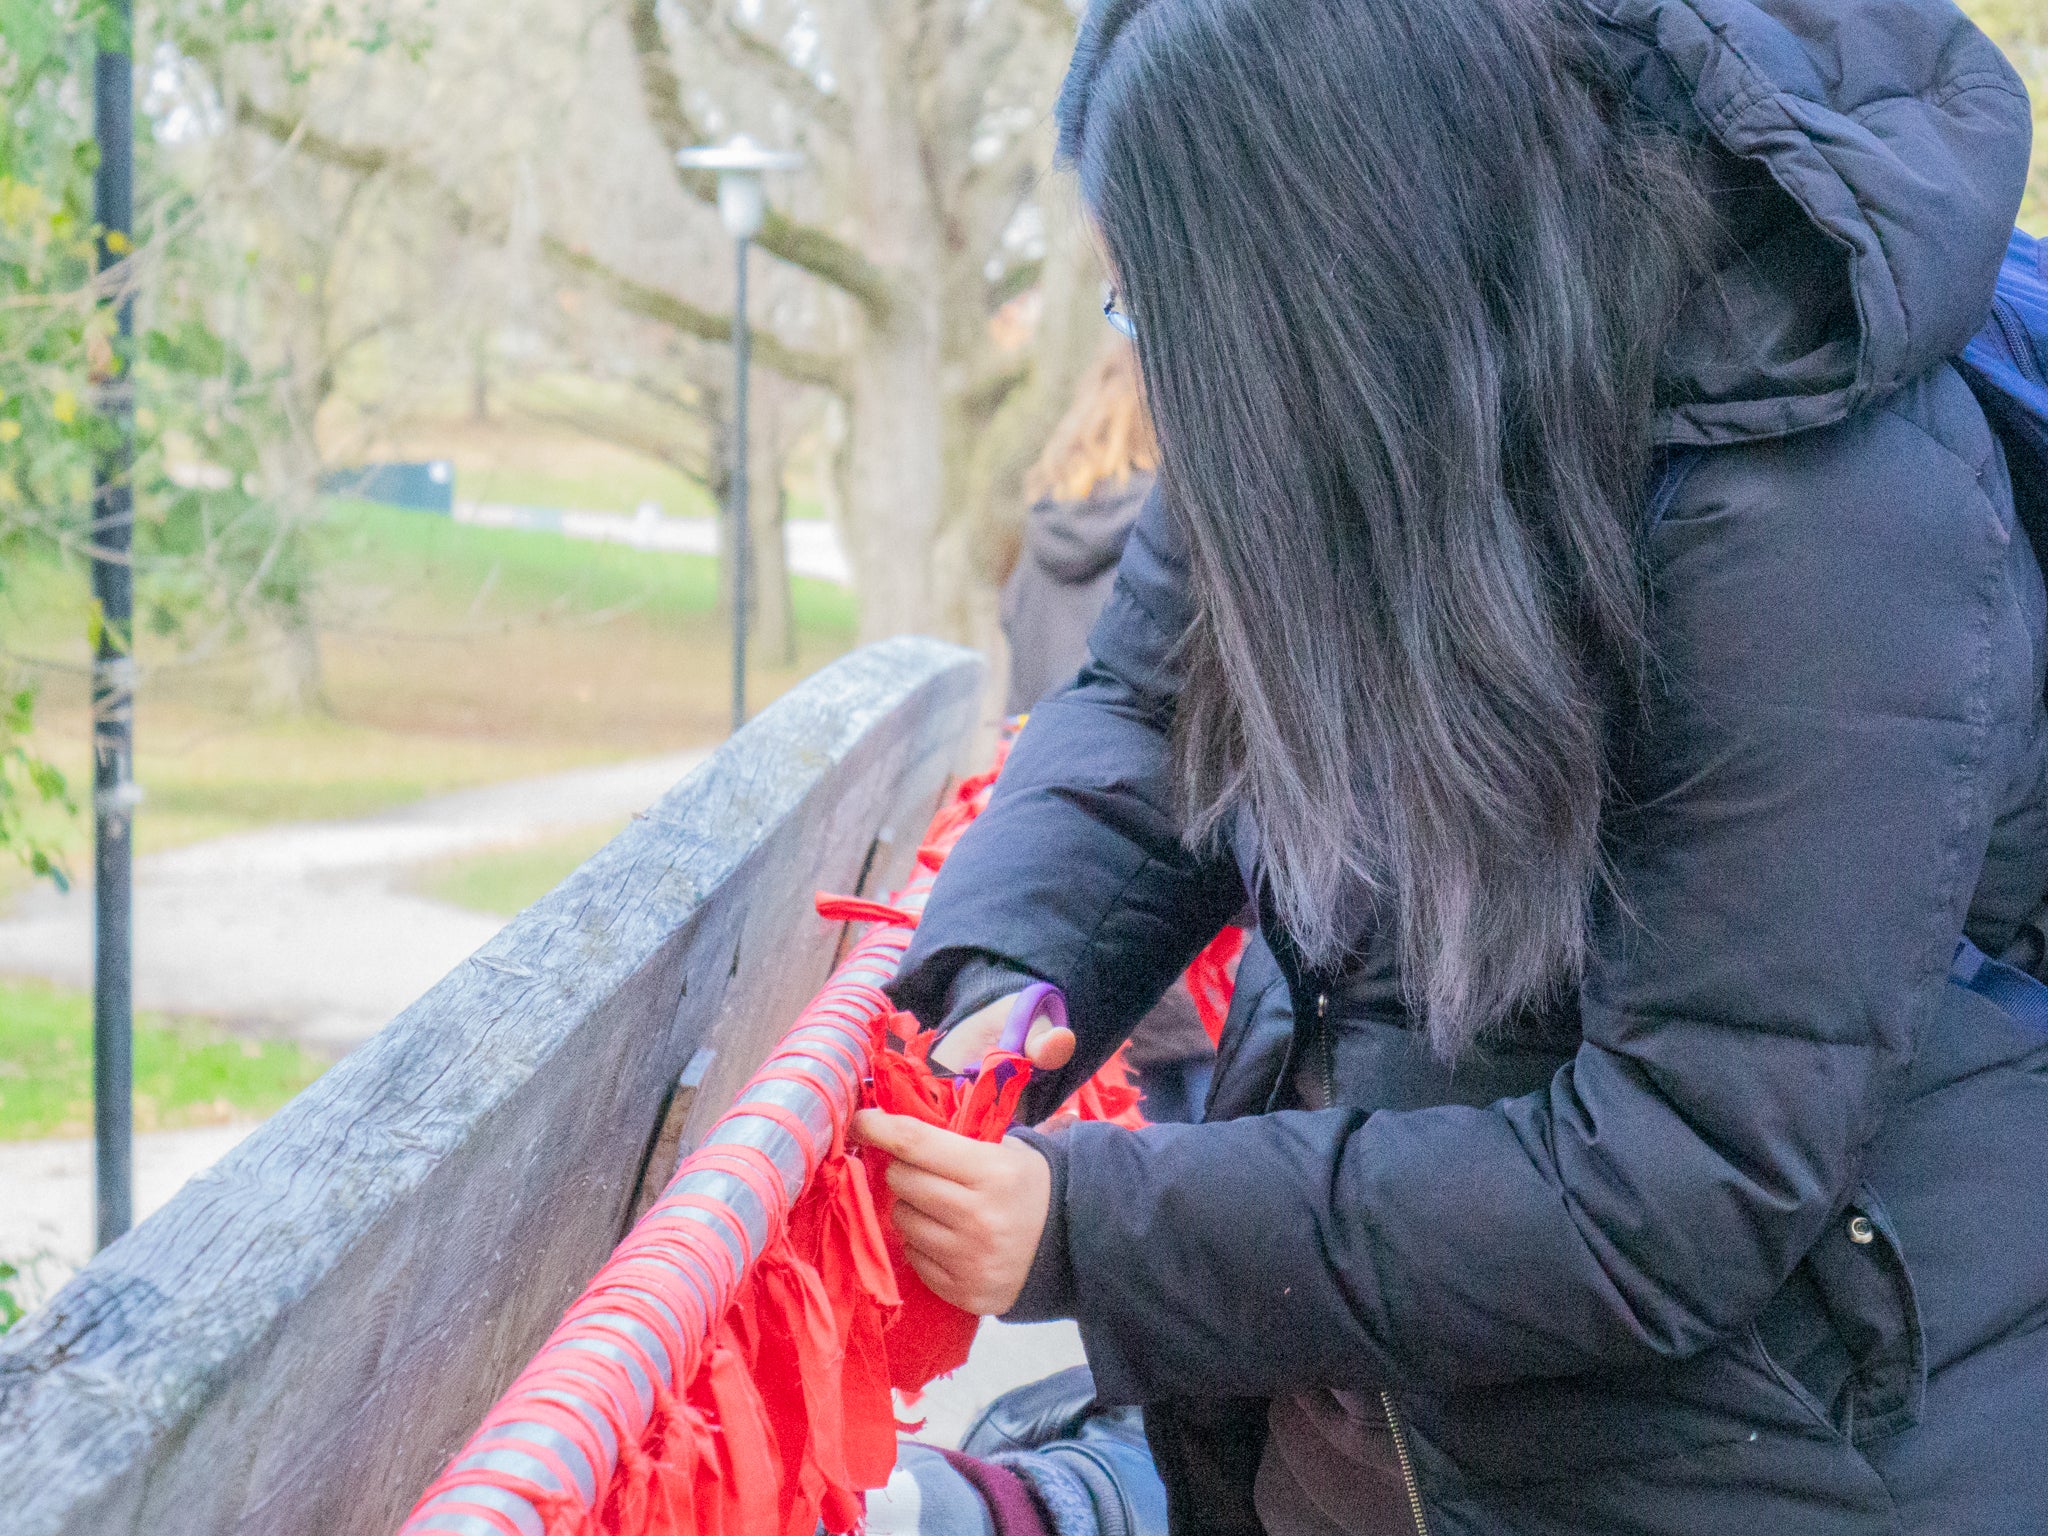 Participant cutting off red fabric ties from bridge